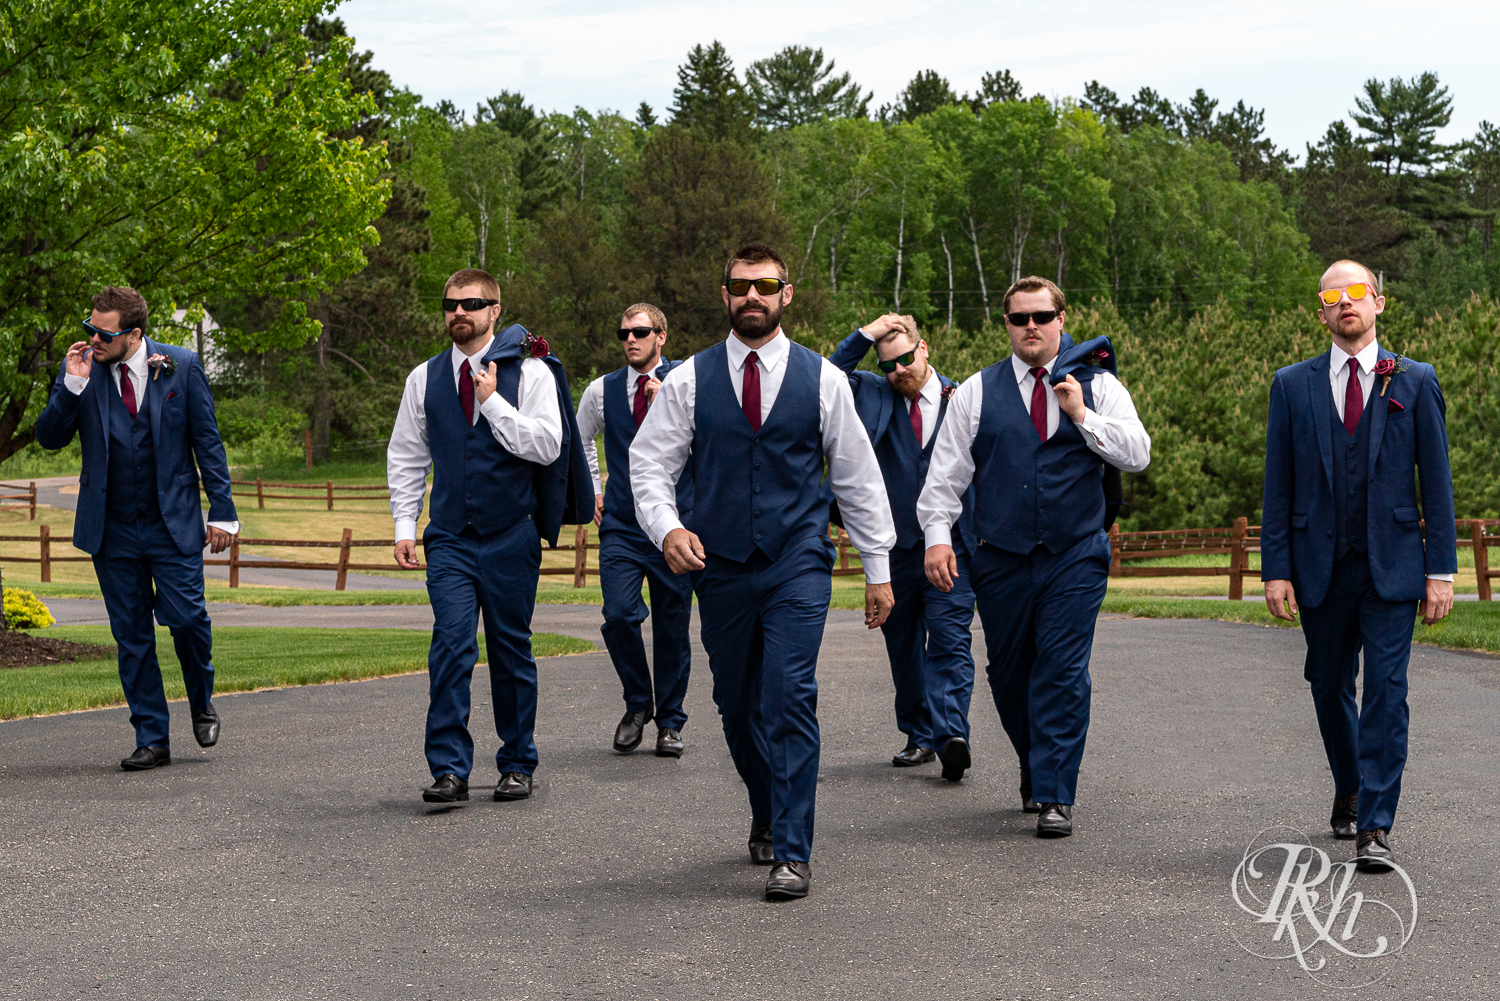 Wedding party in red dresses and blue suits walk down road at Pine Peaks Event Center in Pine River, Minnesota.